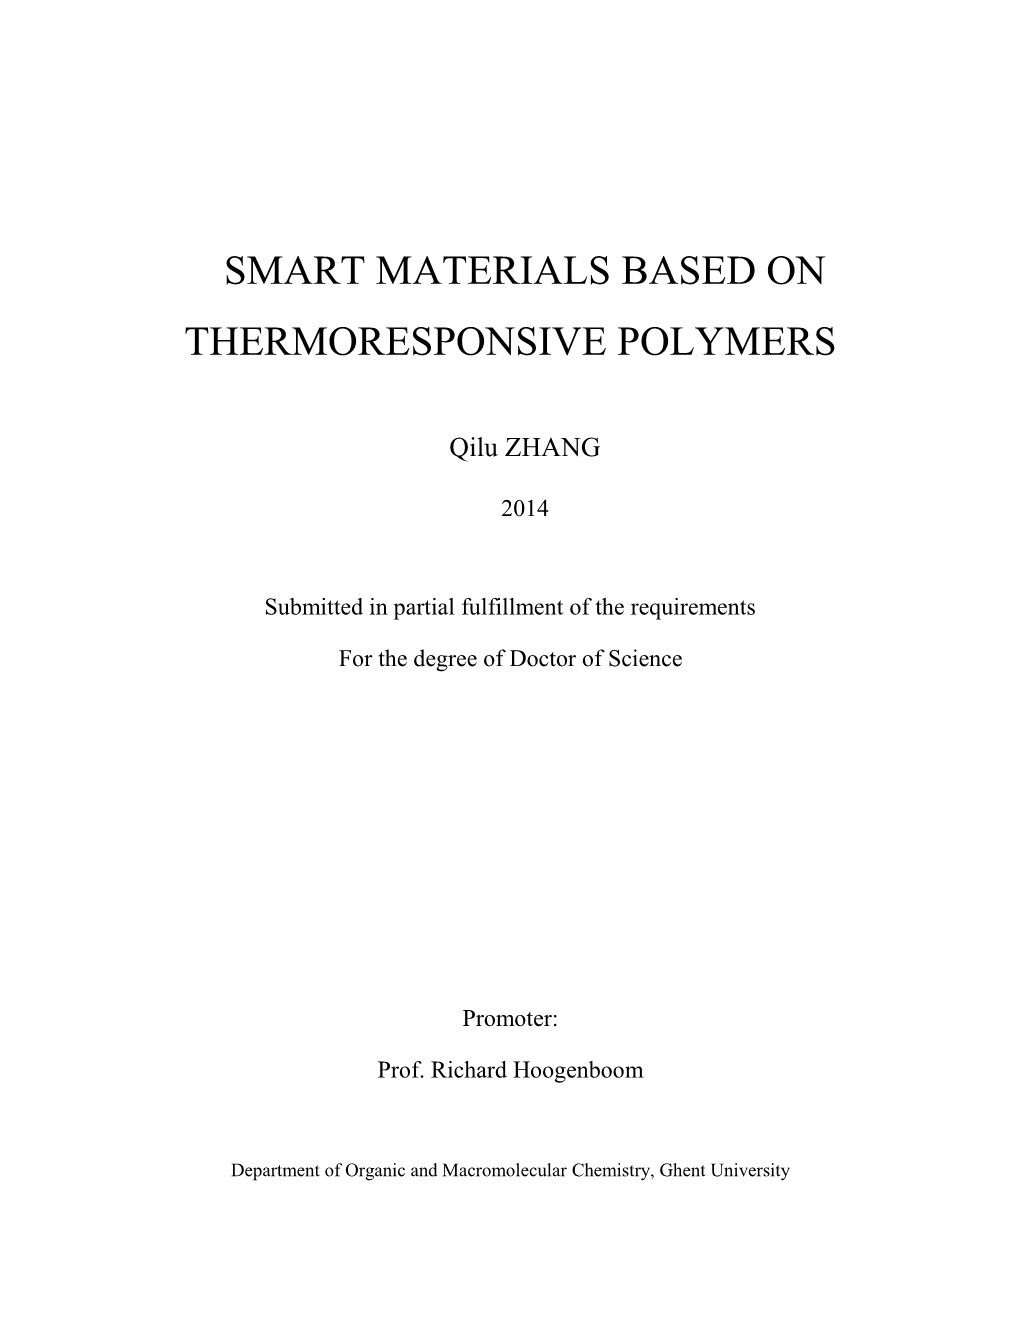 Smart Materials Based on Thermoresponsive Polymers